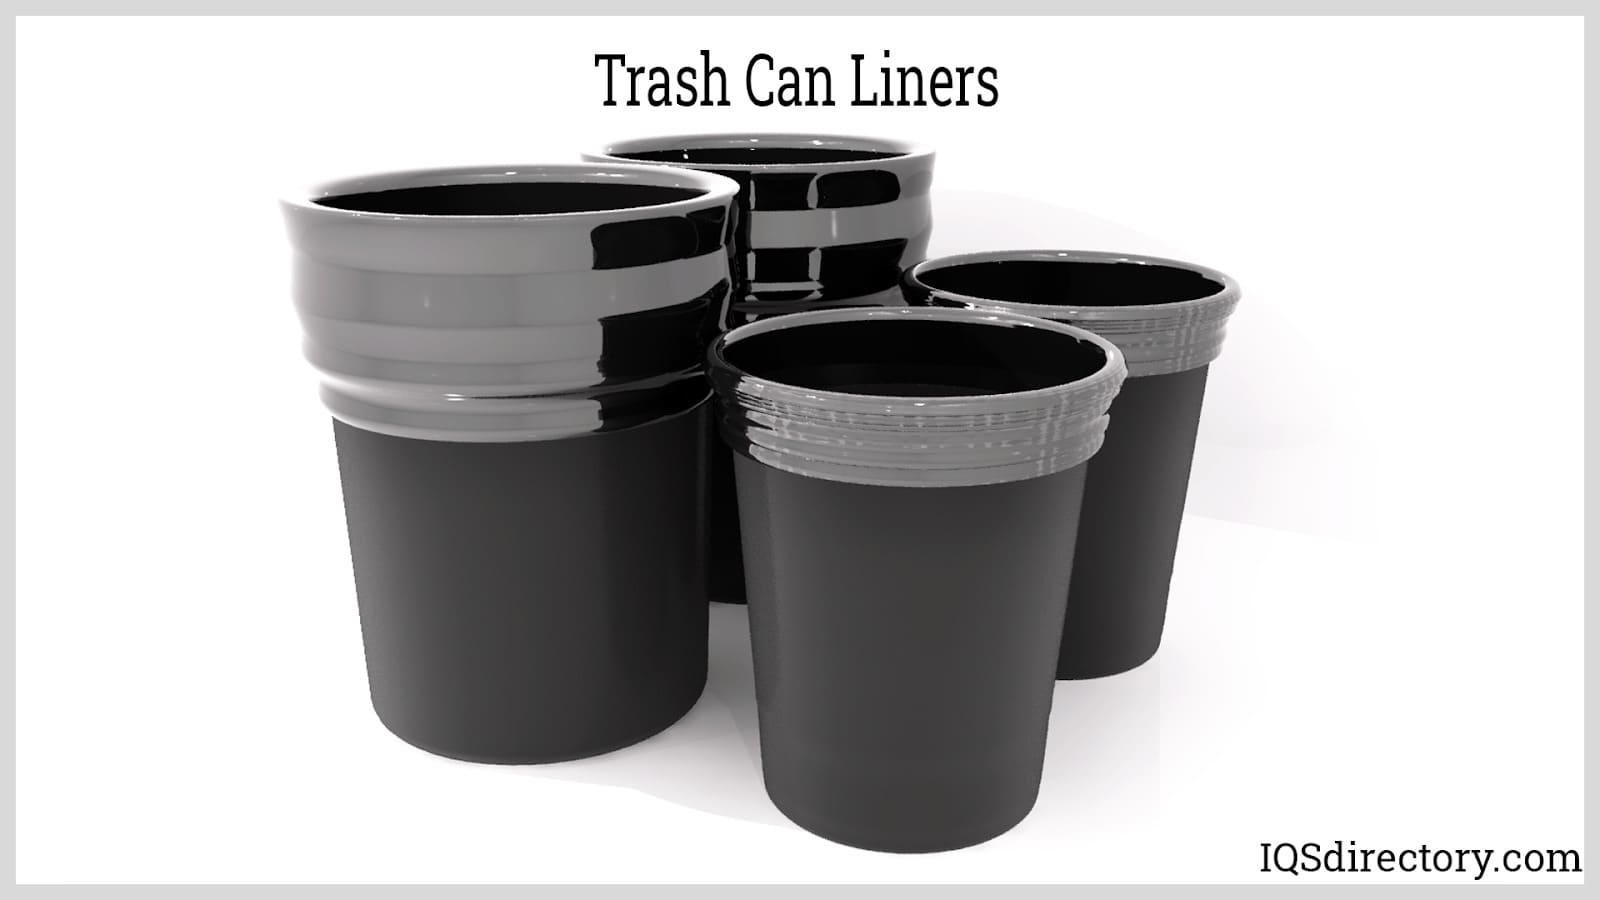 Trash Can Liners